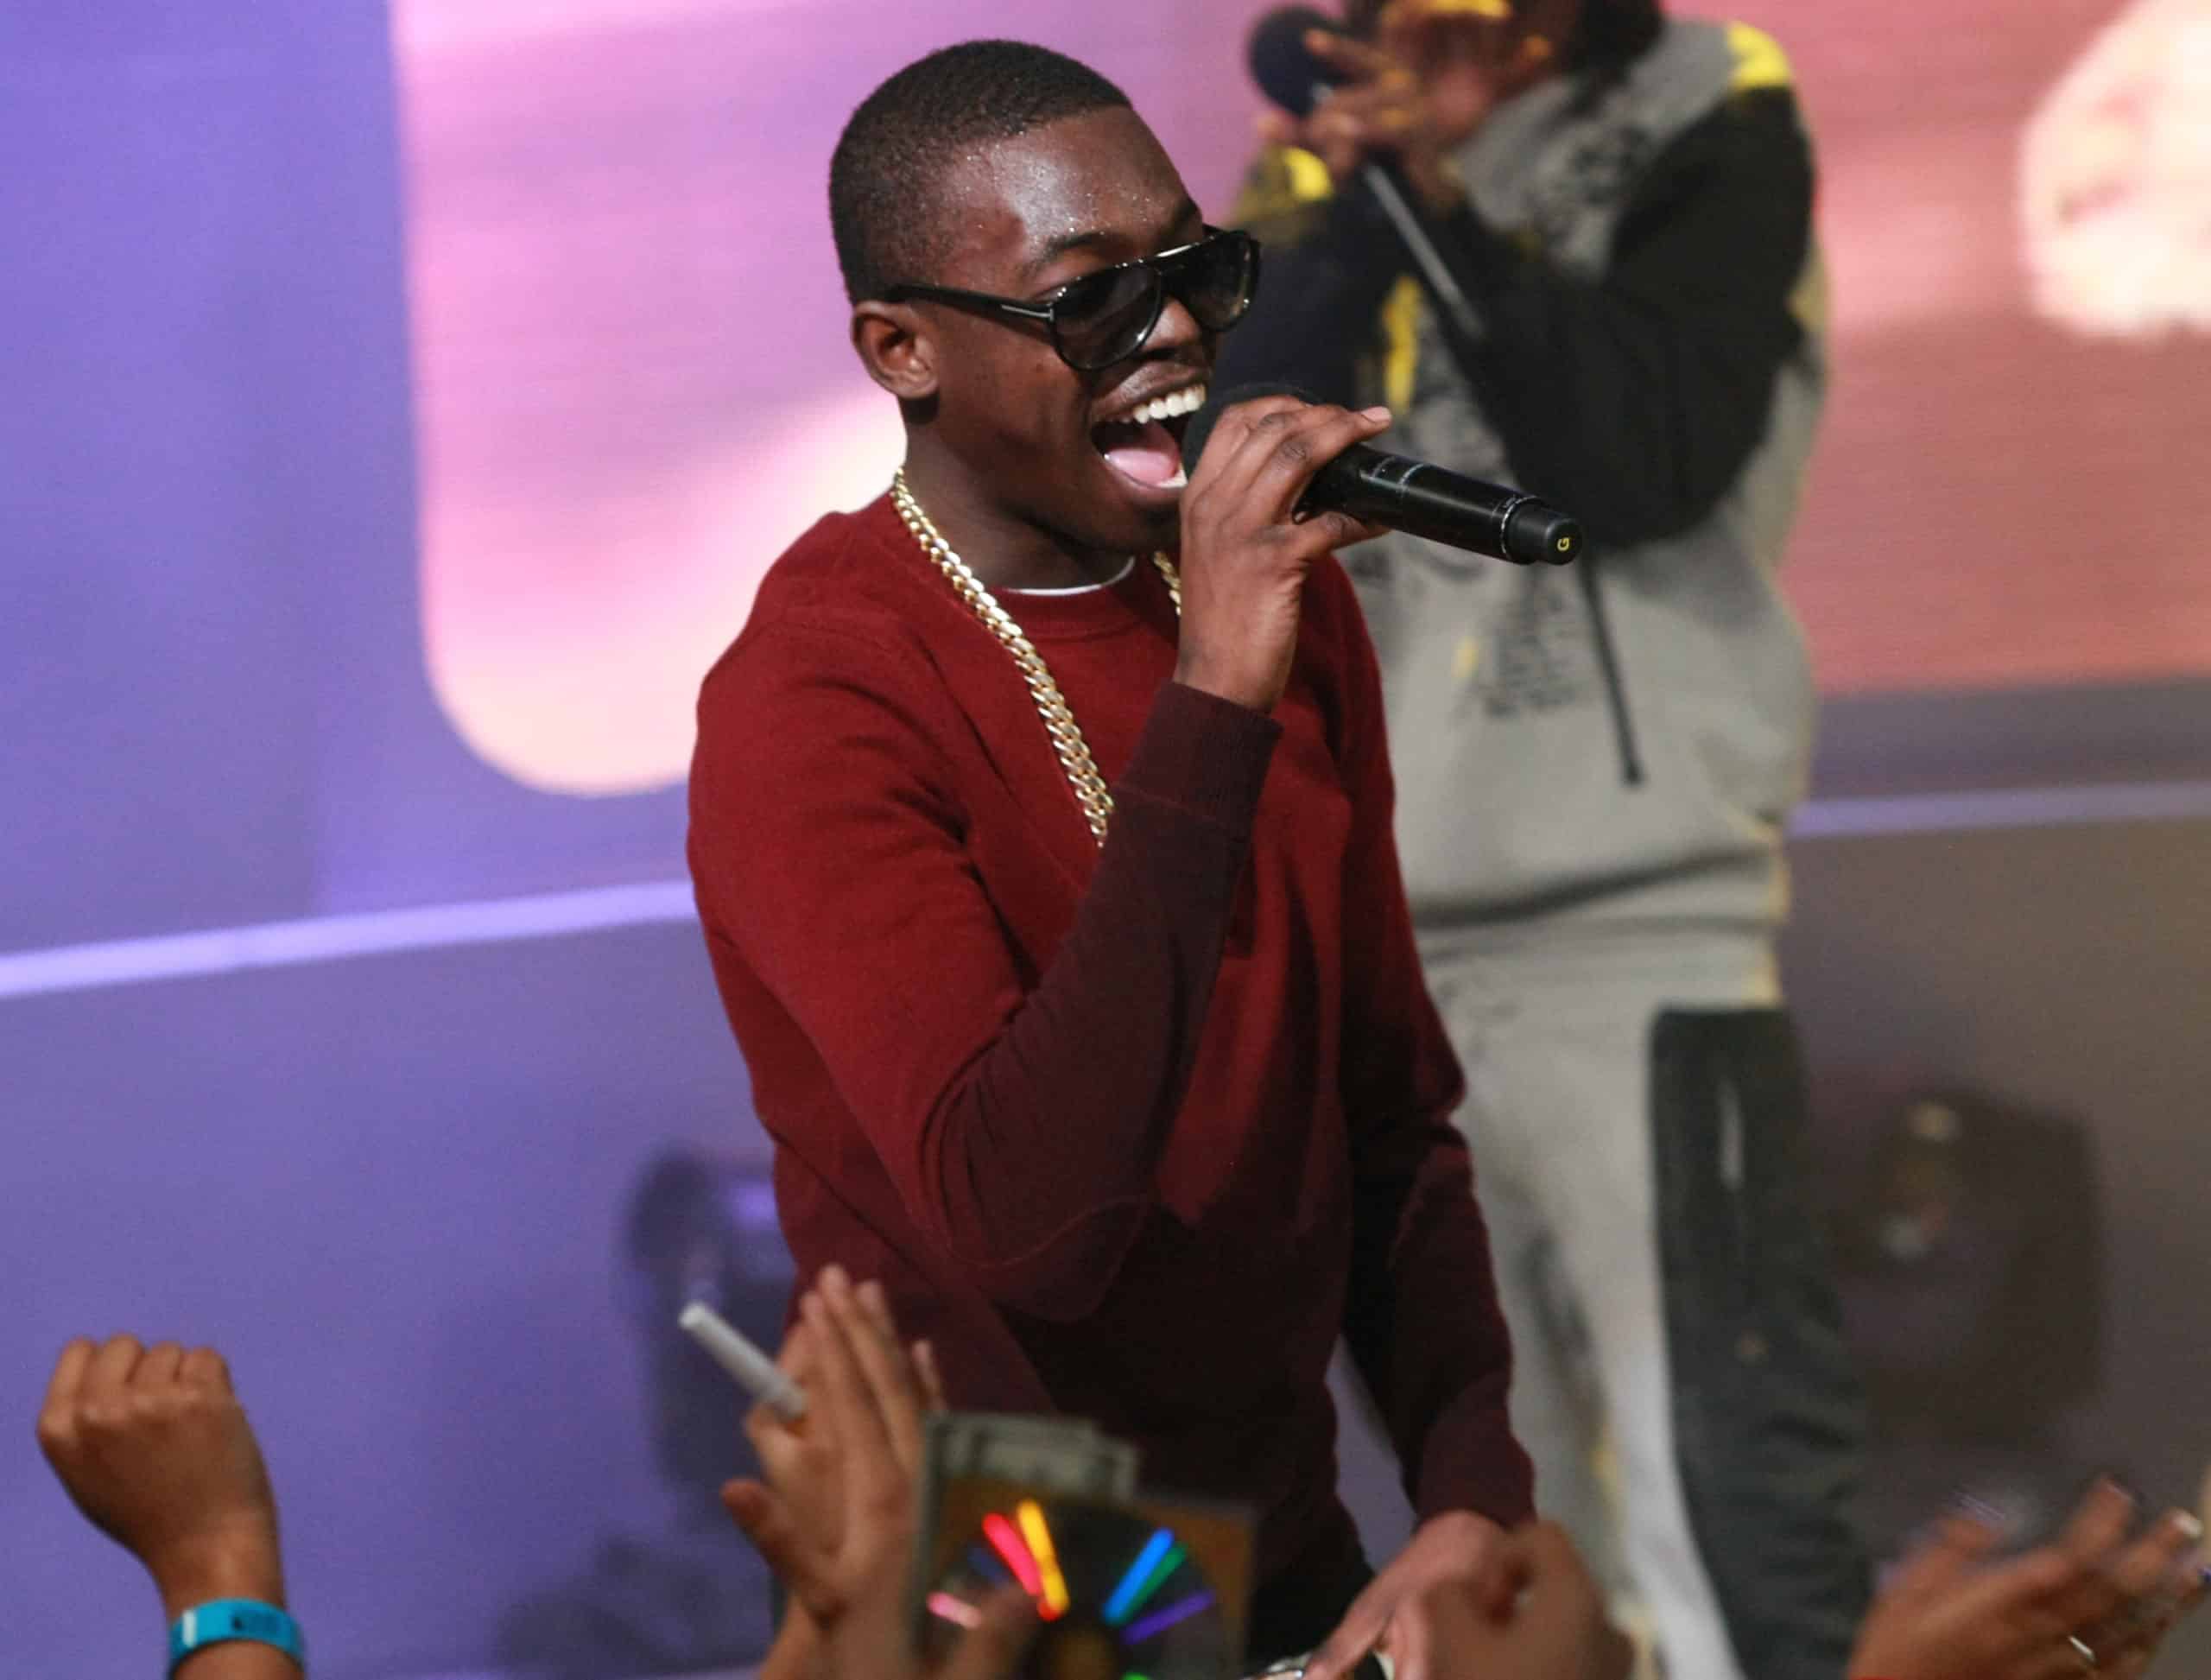 The conditions of Bobby Shmurda's parole have been released. Bobby cannot drink alcohol or go to bars until 2026.